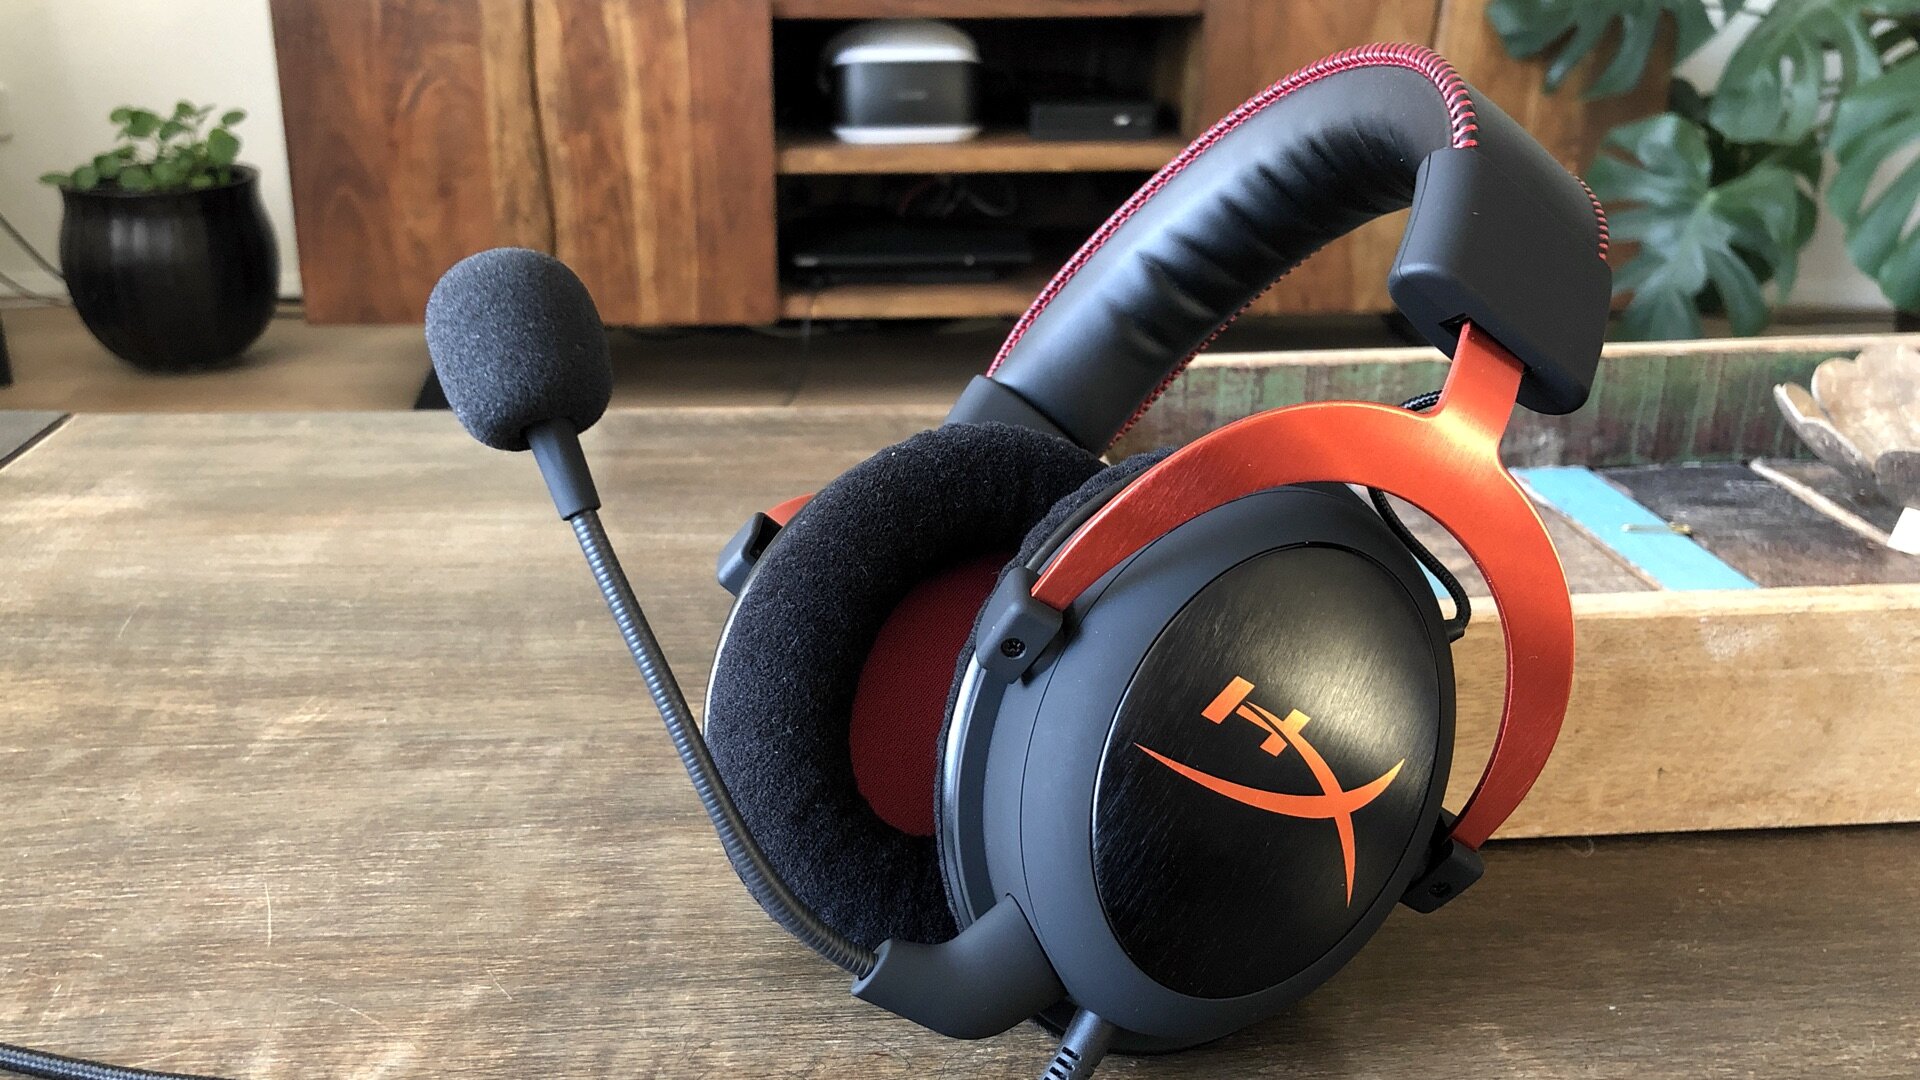 Which one is Best PC Gaming Headset Under $100?